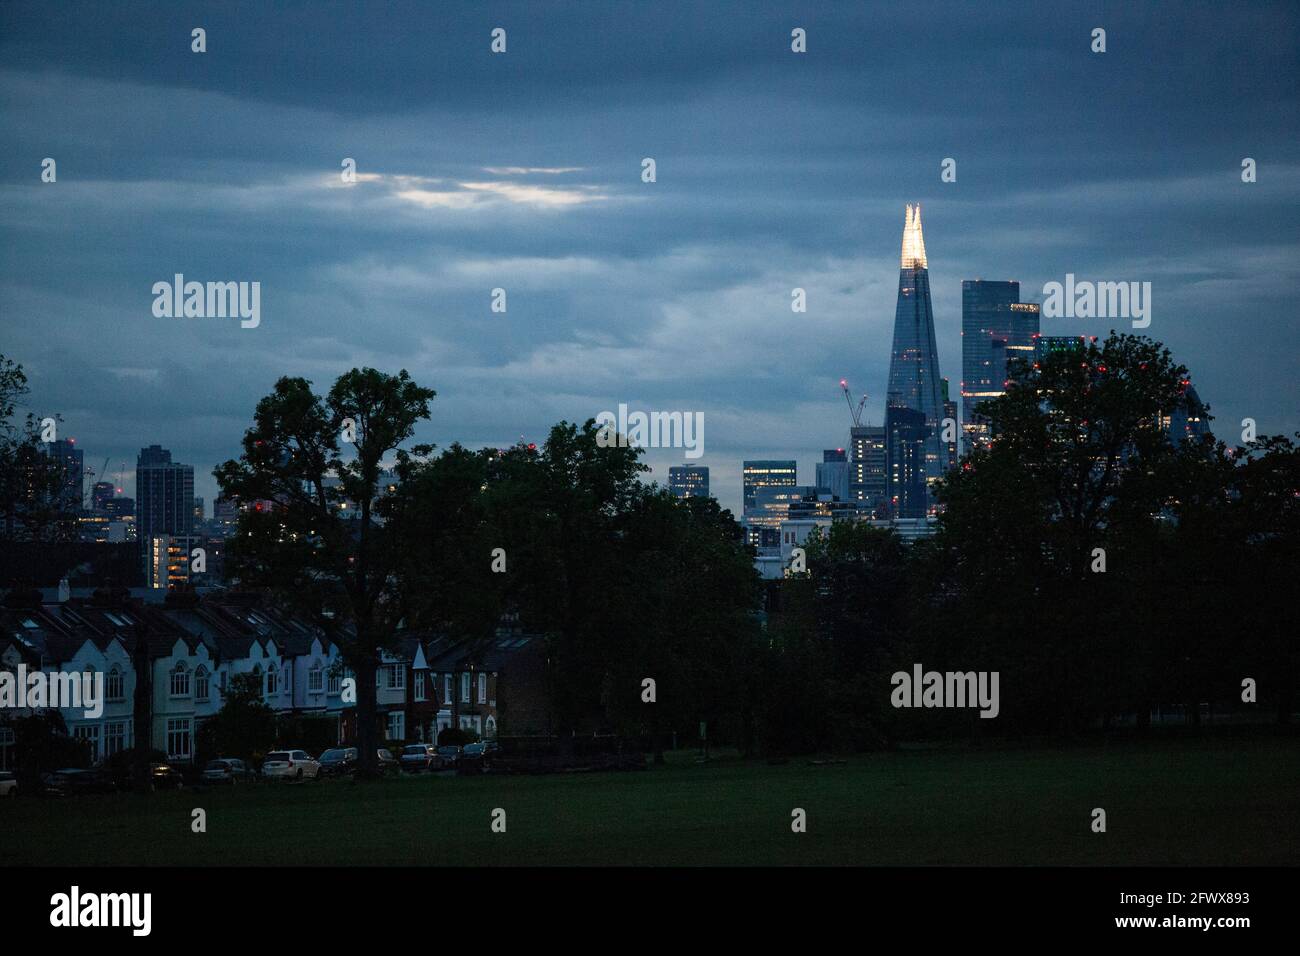 UK Weather, London, 24 May 2021: At dusk the stormy weather with heavy rain showers gives a dramatic skyline with central London's lights contrasting to the suburban houses that line Camberwell's Ruskin Park. AnnaWatson/Alamy Live News Stock Photo